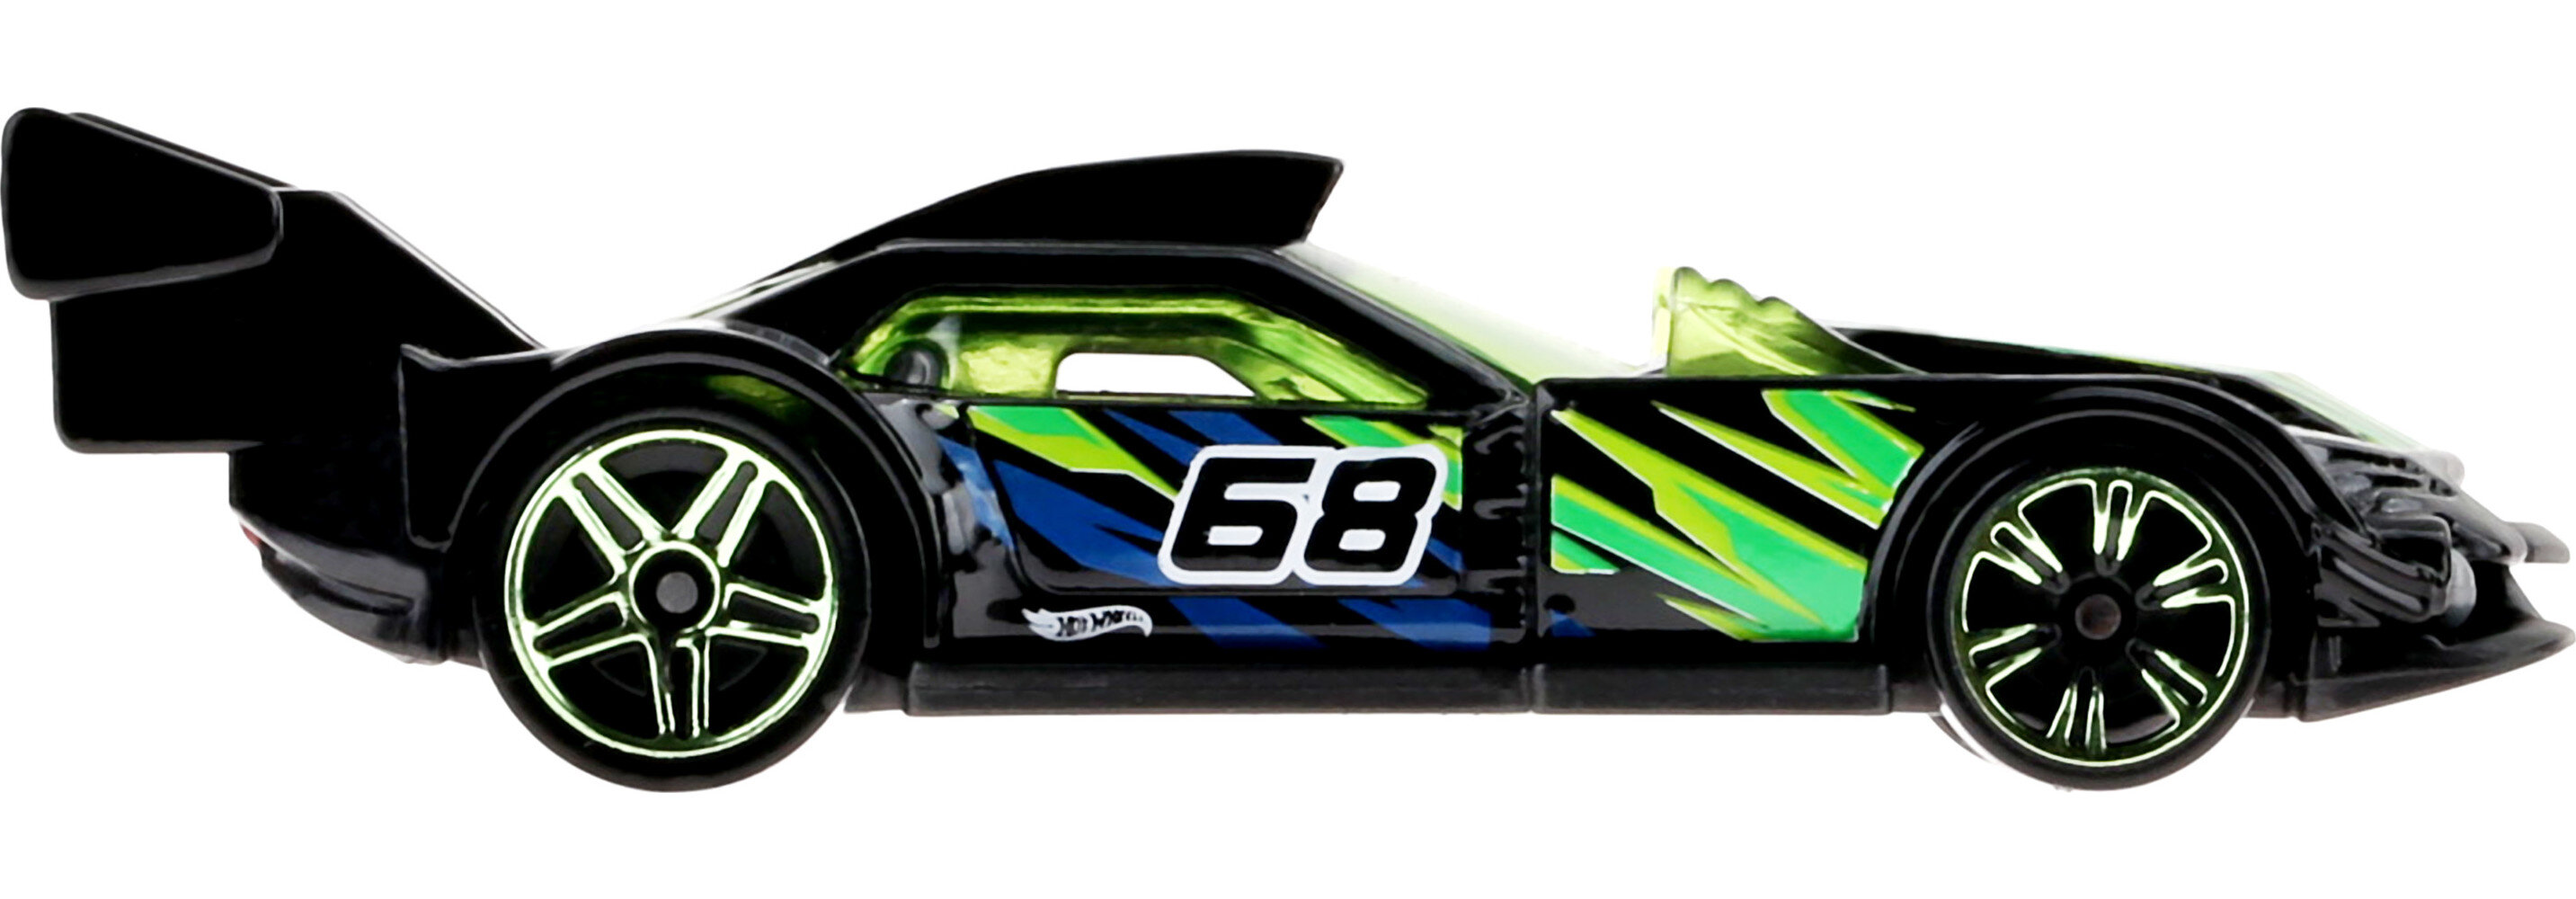 Hot Wheels Cars, Neon Speeders, 1 Die-Cast Toy Car in 1:64 Scale with Neon Designs - image 2 of 6